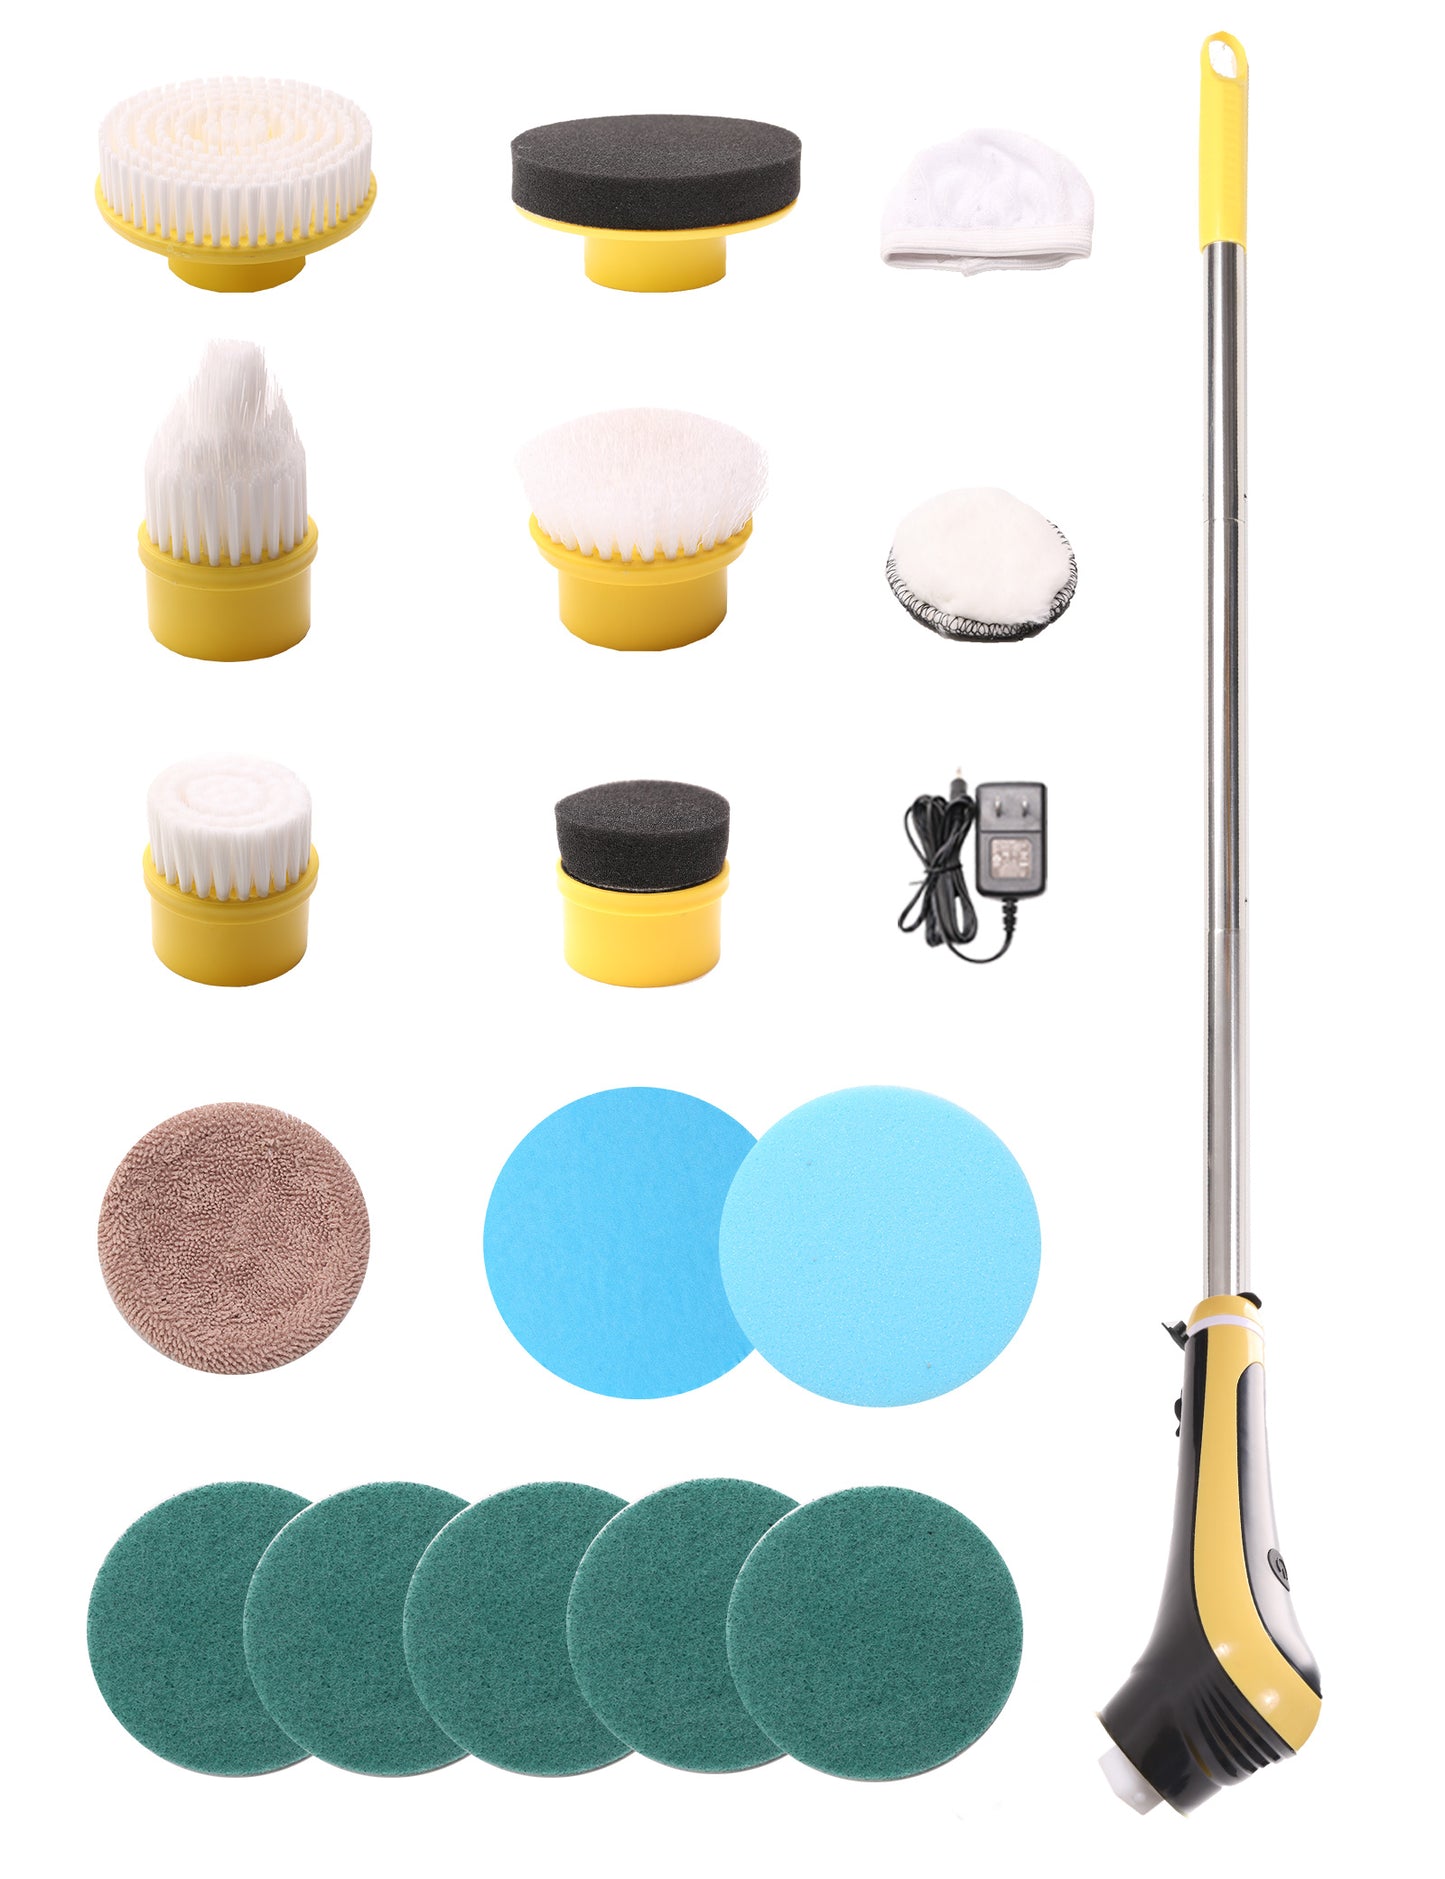 Electric Spin Scrubber-Shower Scrubber For Cleaning With Extension Handle  And 8 Brush Cordless Head Electric Scrubber For Cleaning Bathroom, Tile